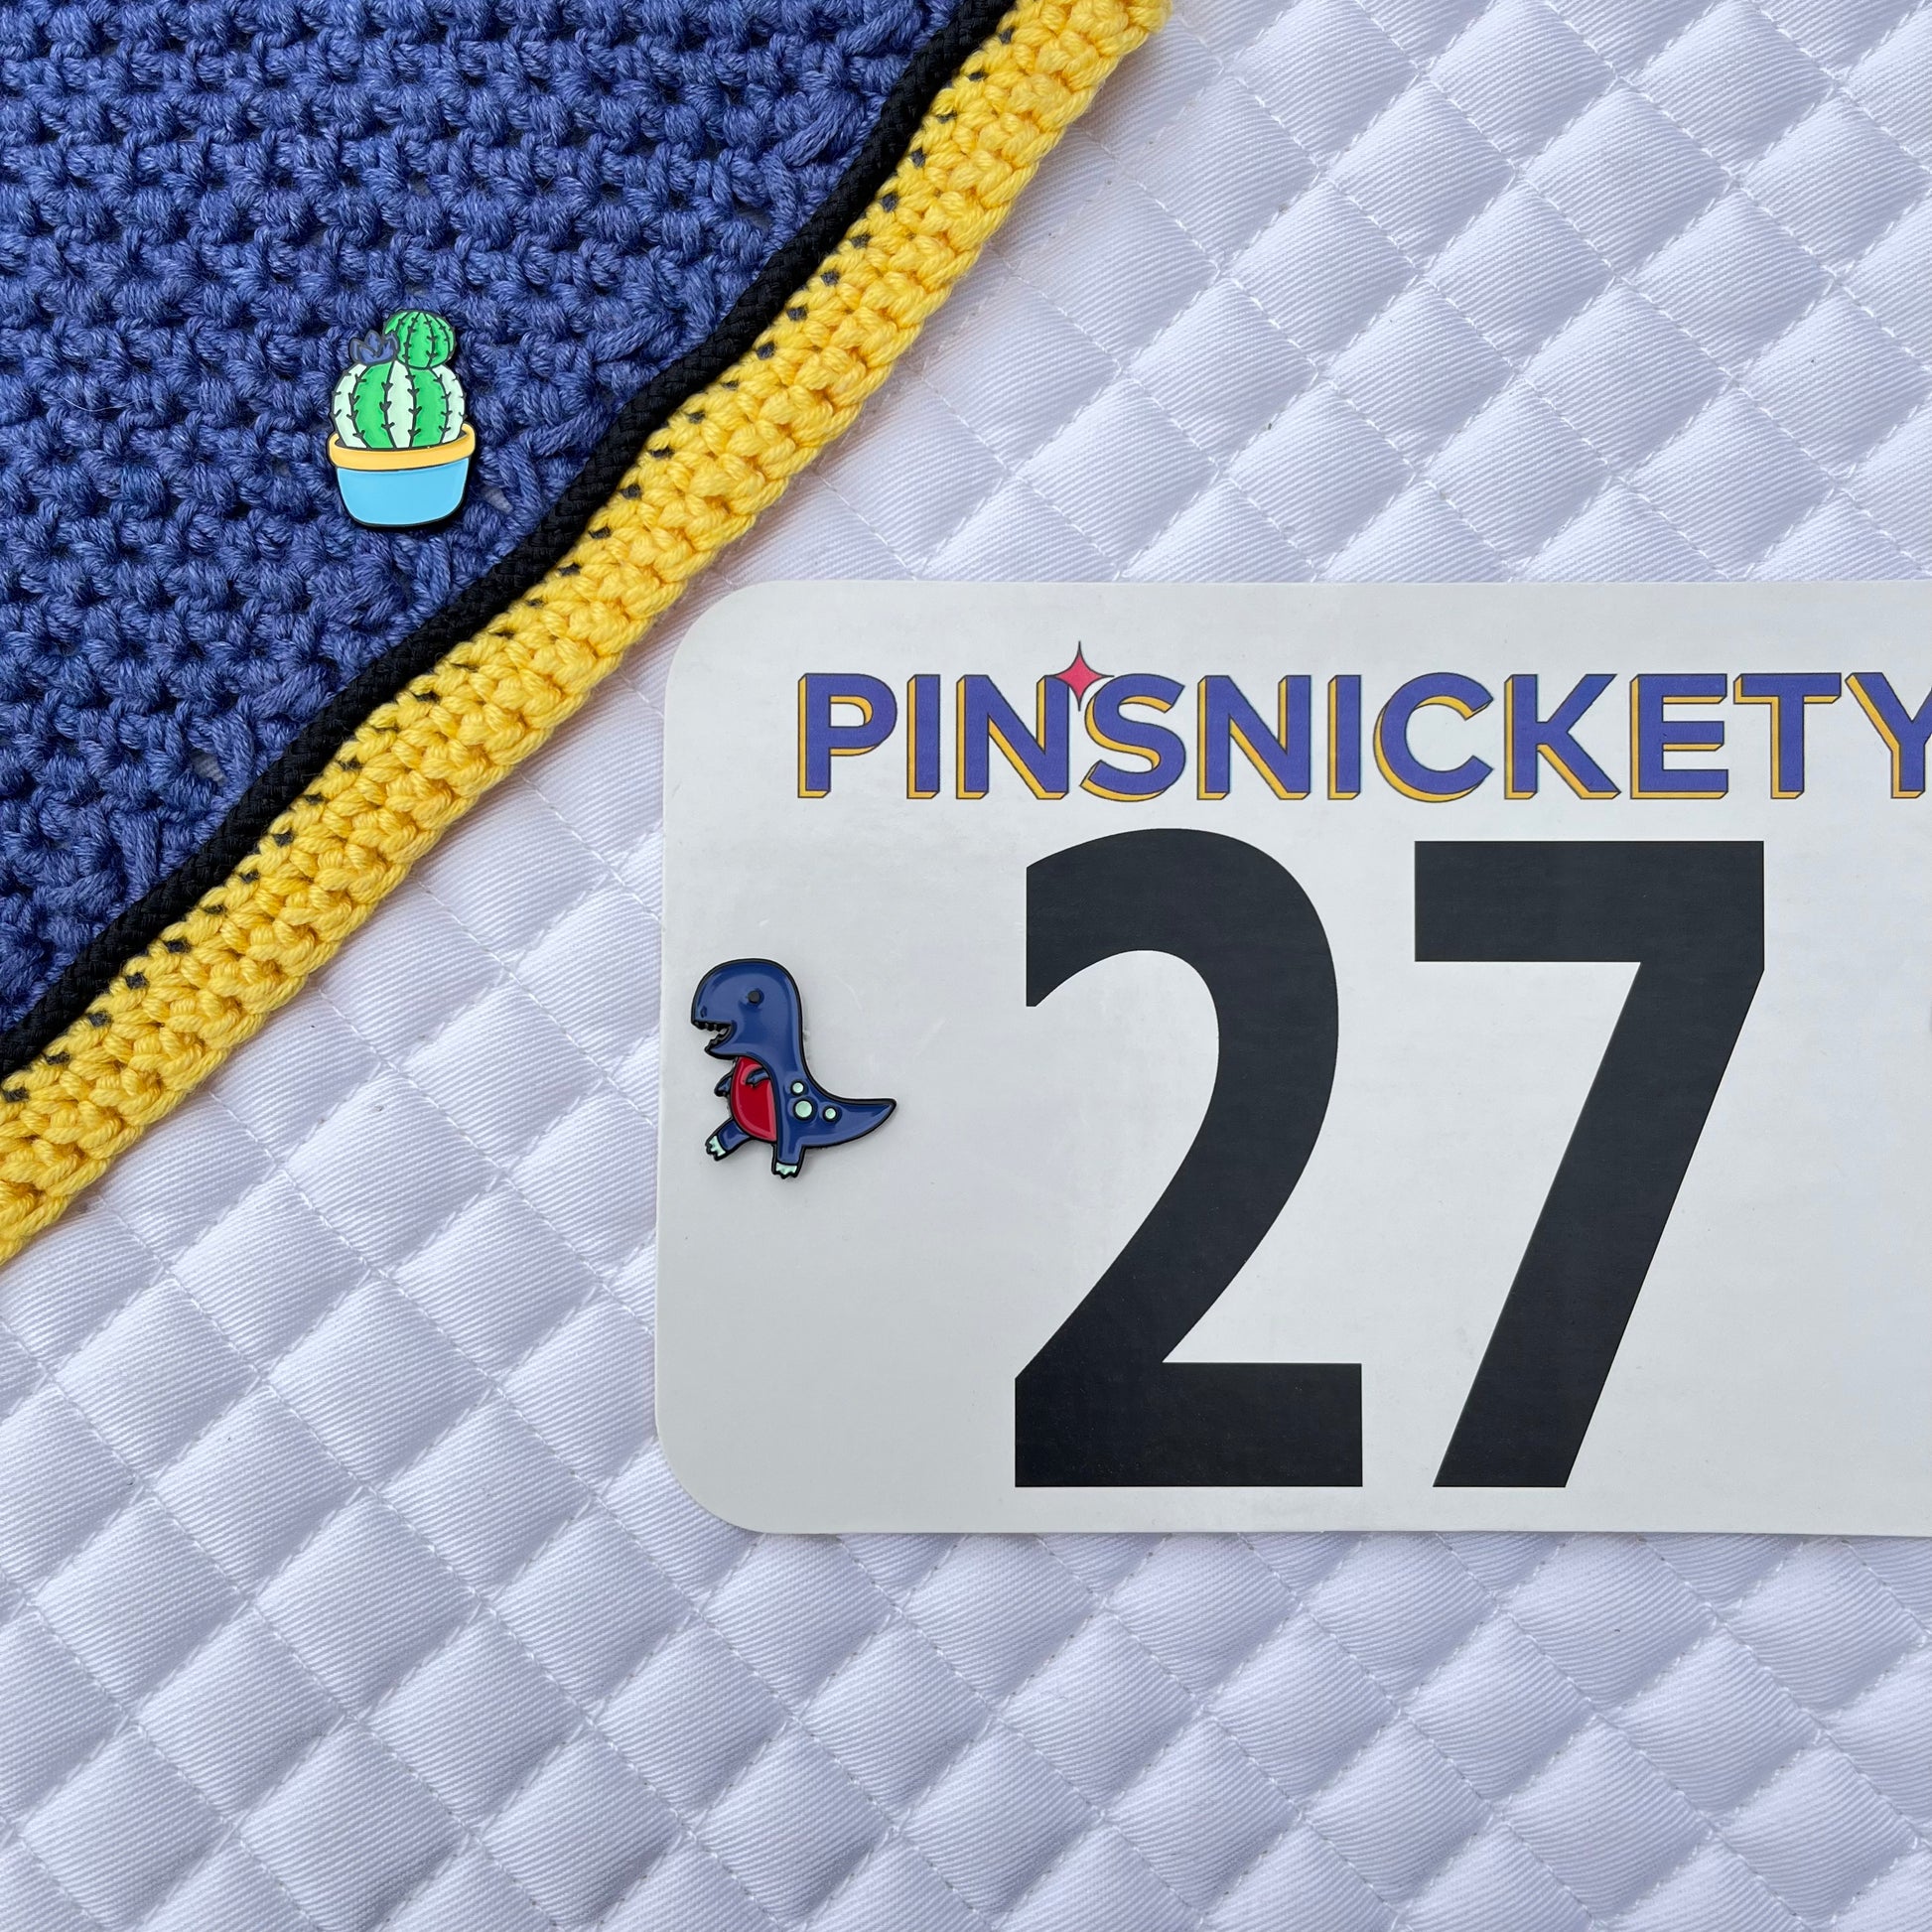 pinsnickety cactus pin on a fly bonnet and t-rex horse pin on a horse show number attached to a saddle pad